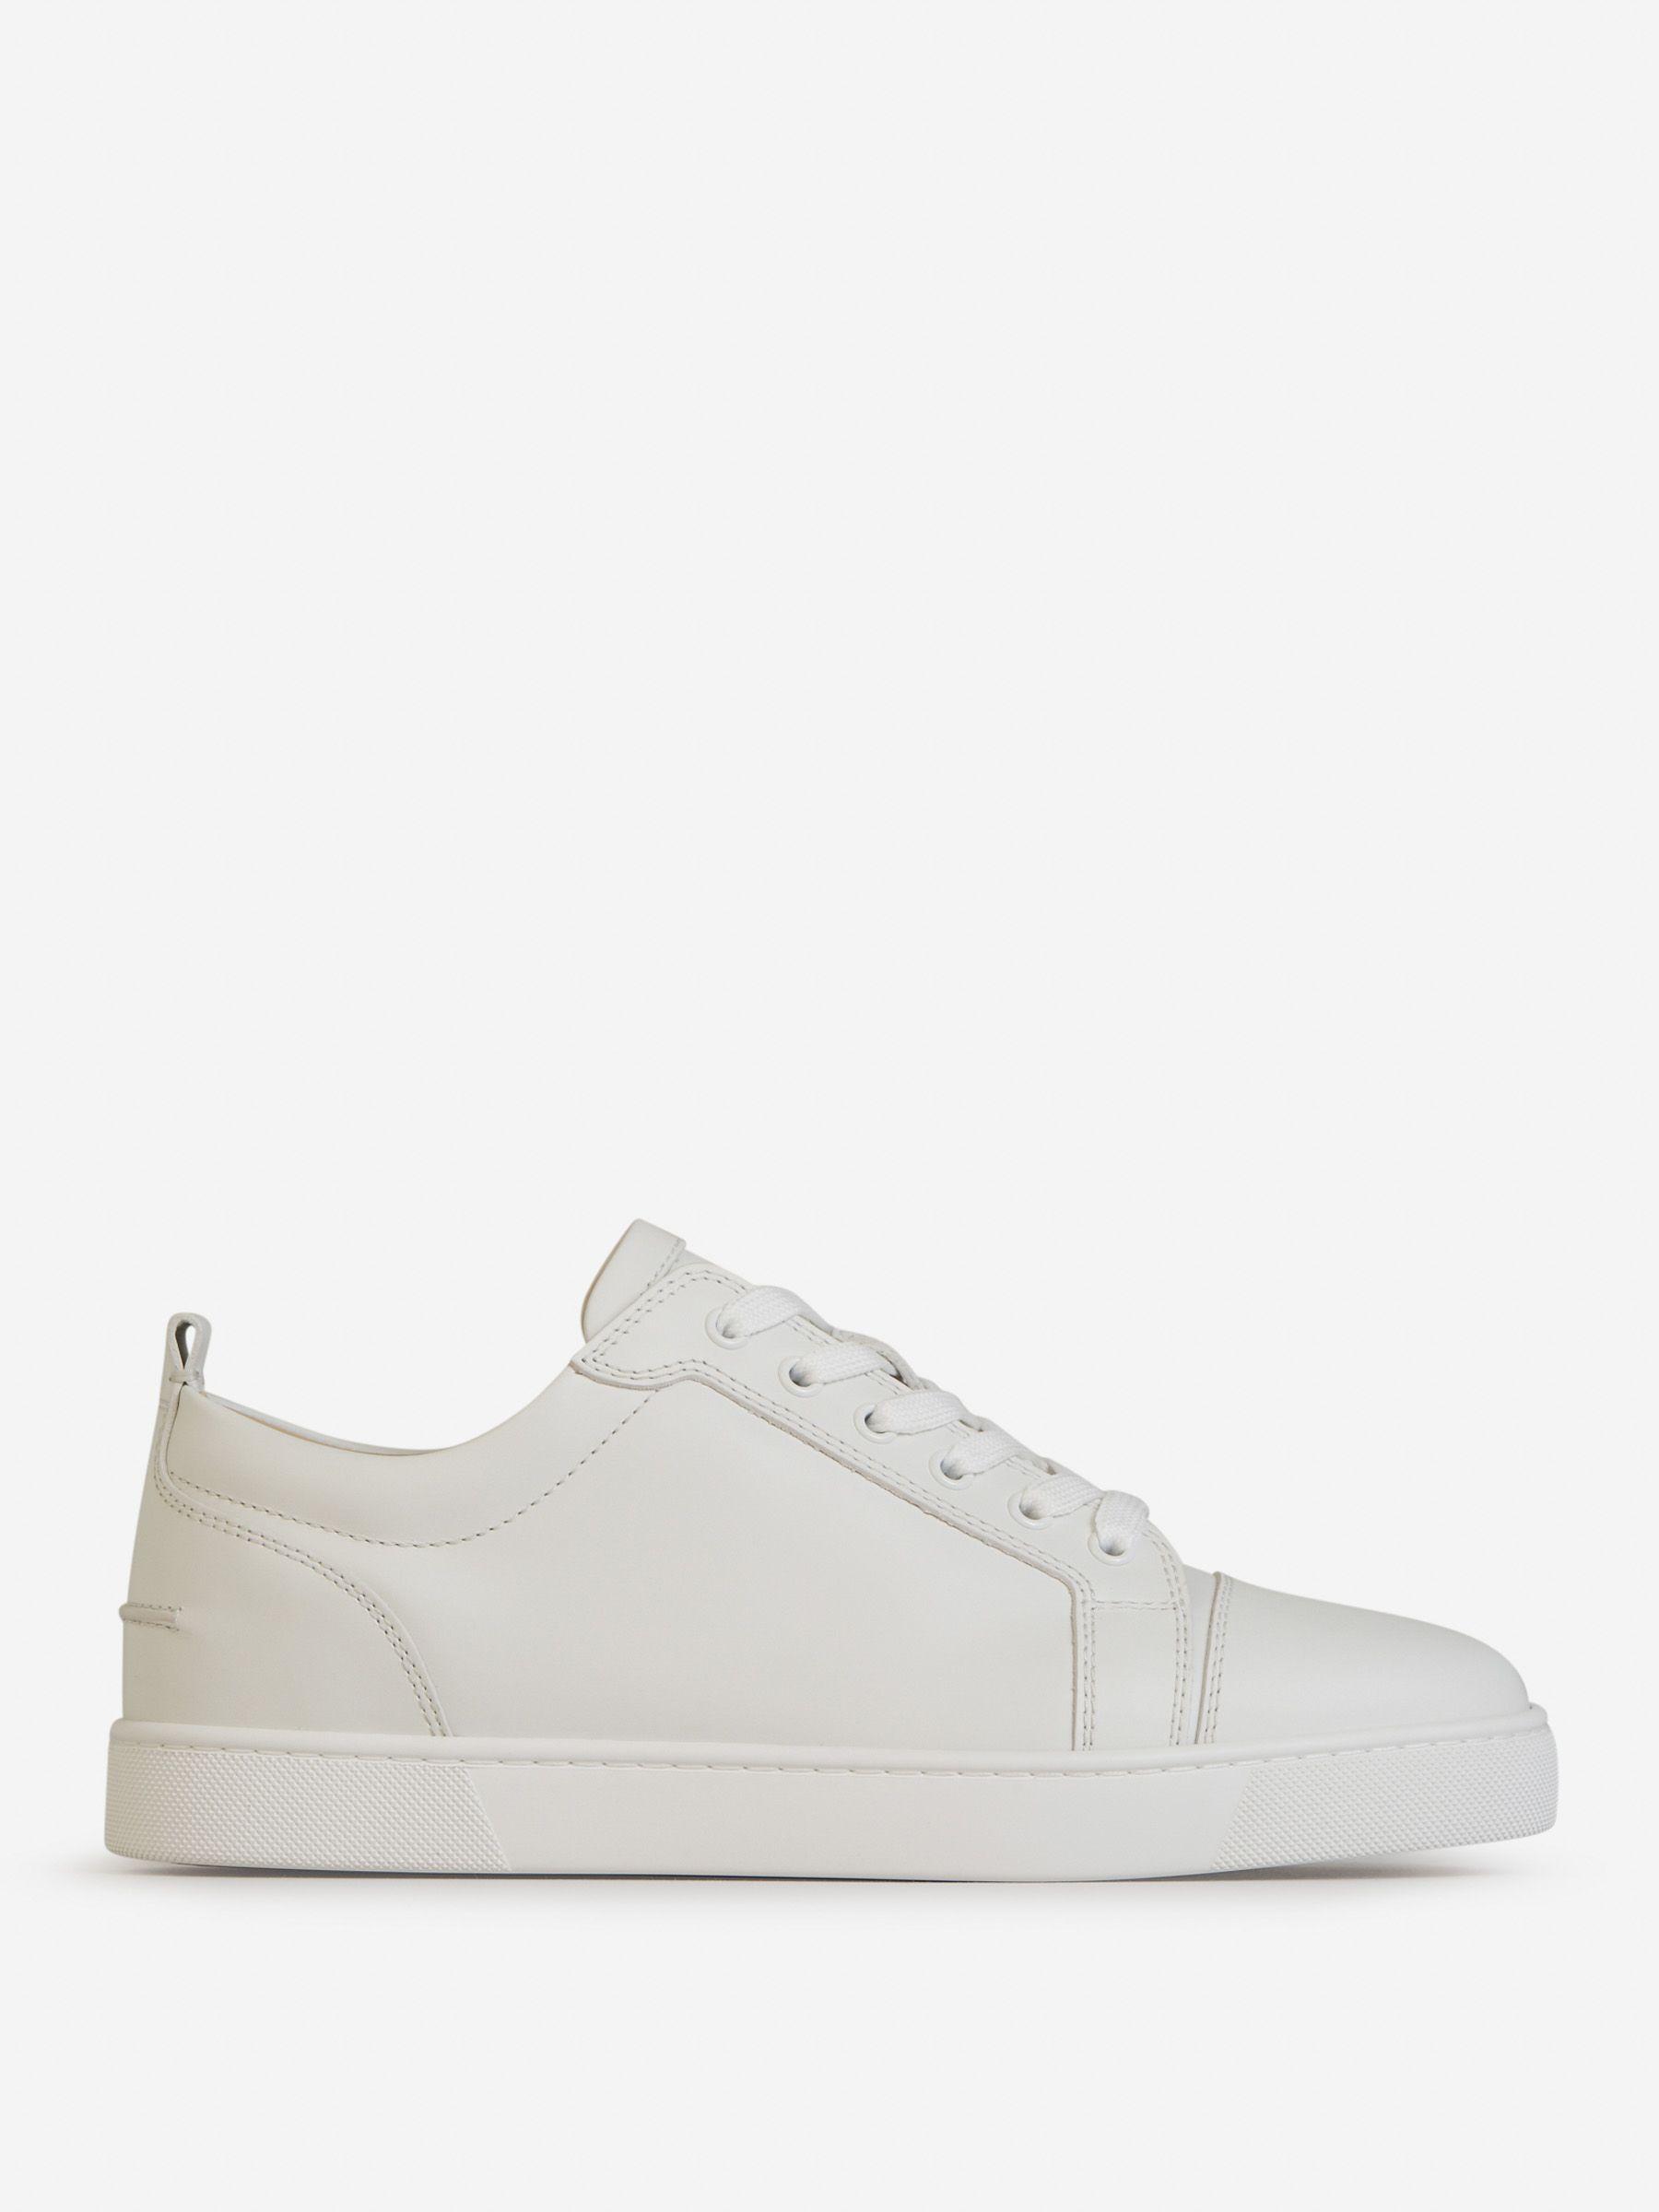 Christian Louboutin White Leather And Mesh Louis Junior Spikes Low Top  Sneakers Size 44 Christian Louboutin